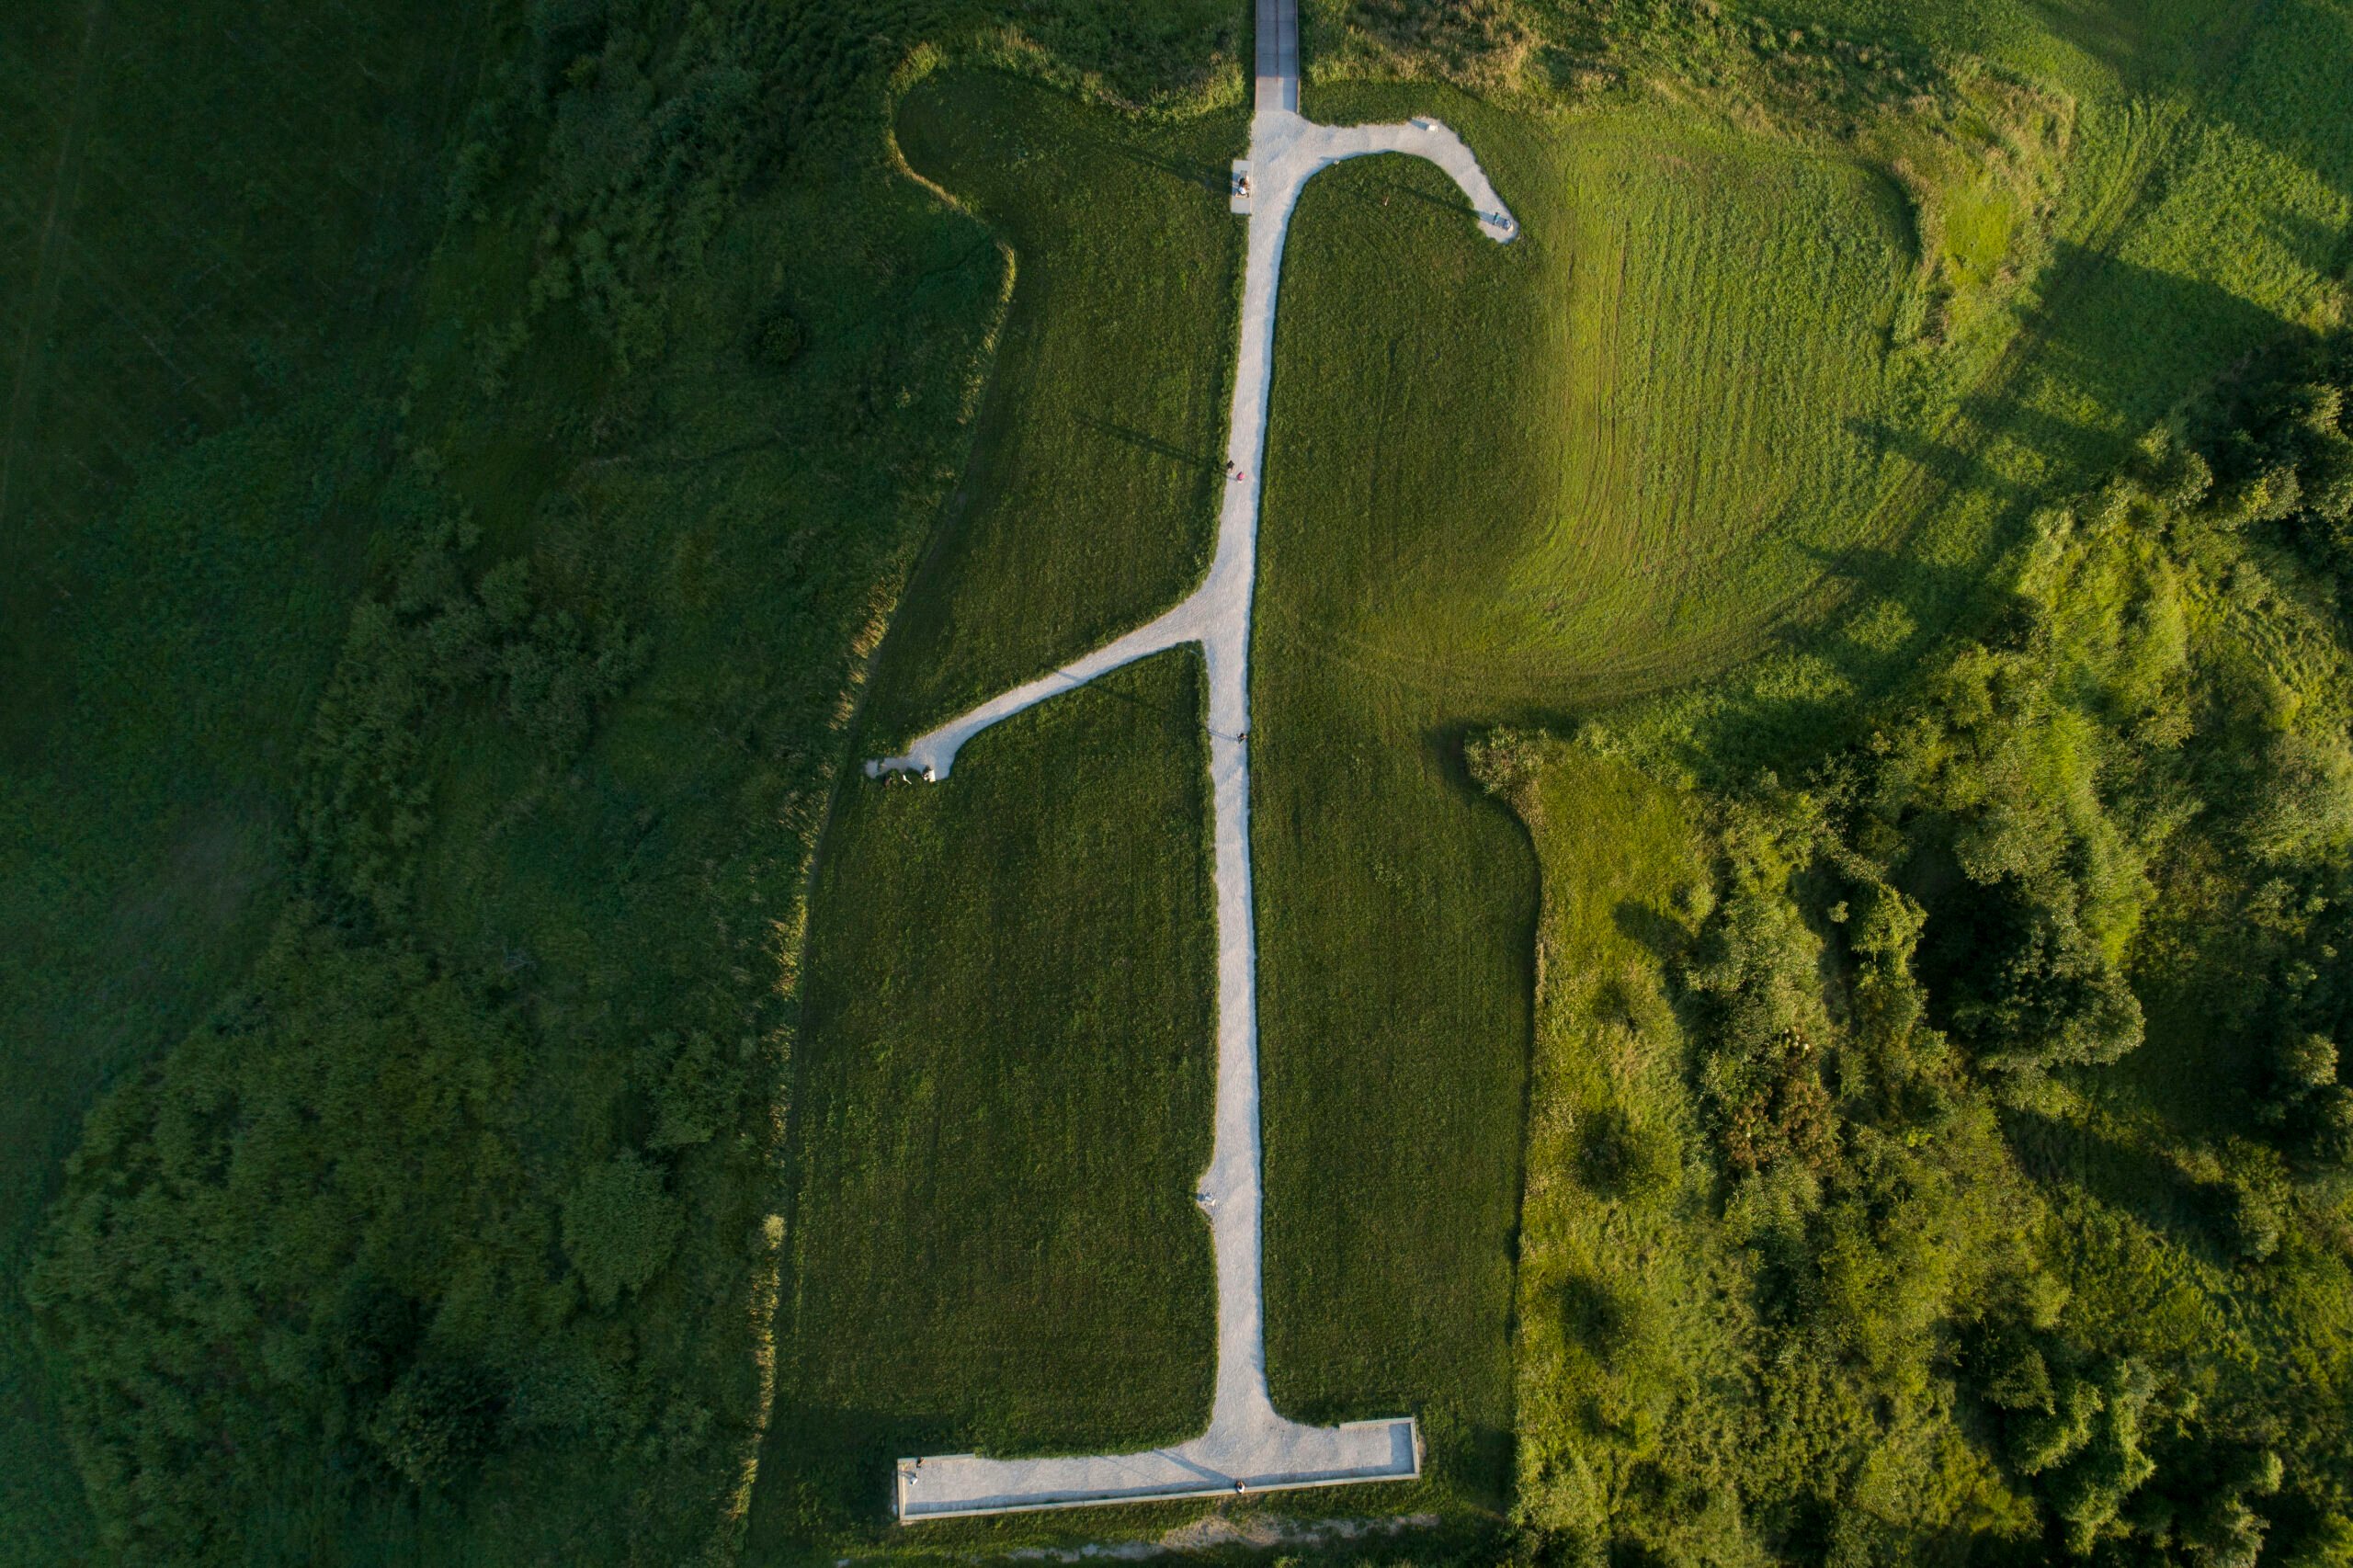 This aerial photo by Daniel Acker emphasizes the walking paths to and around the Cahokia Mounds